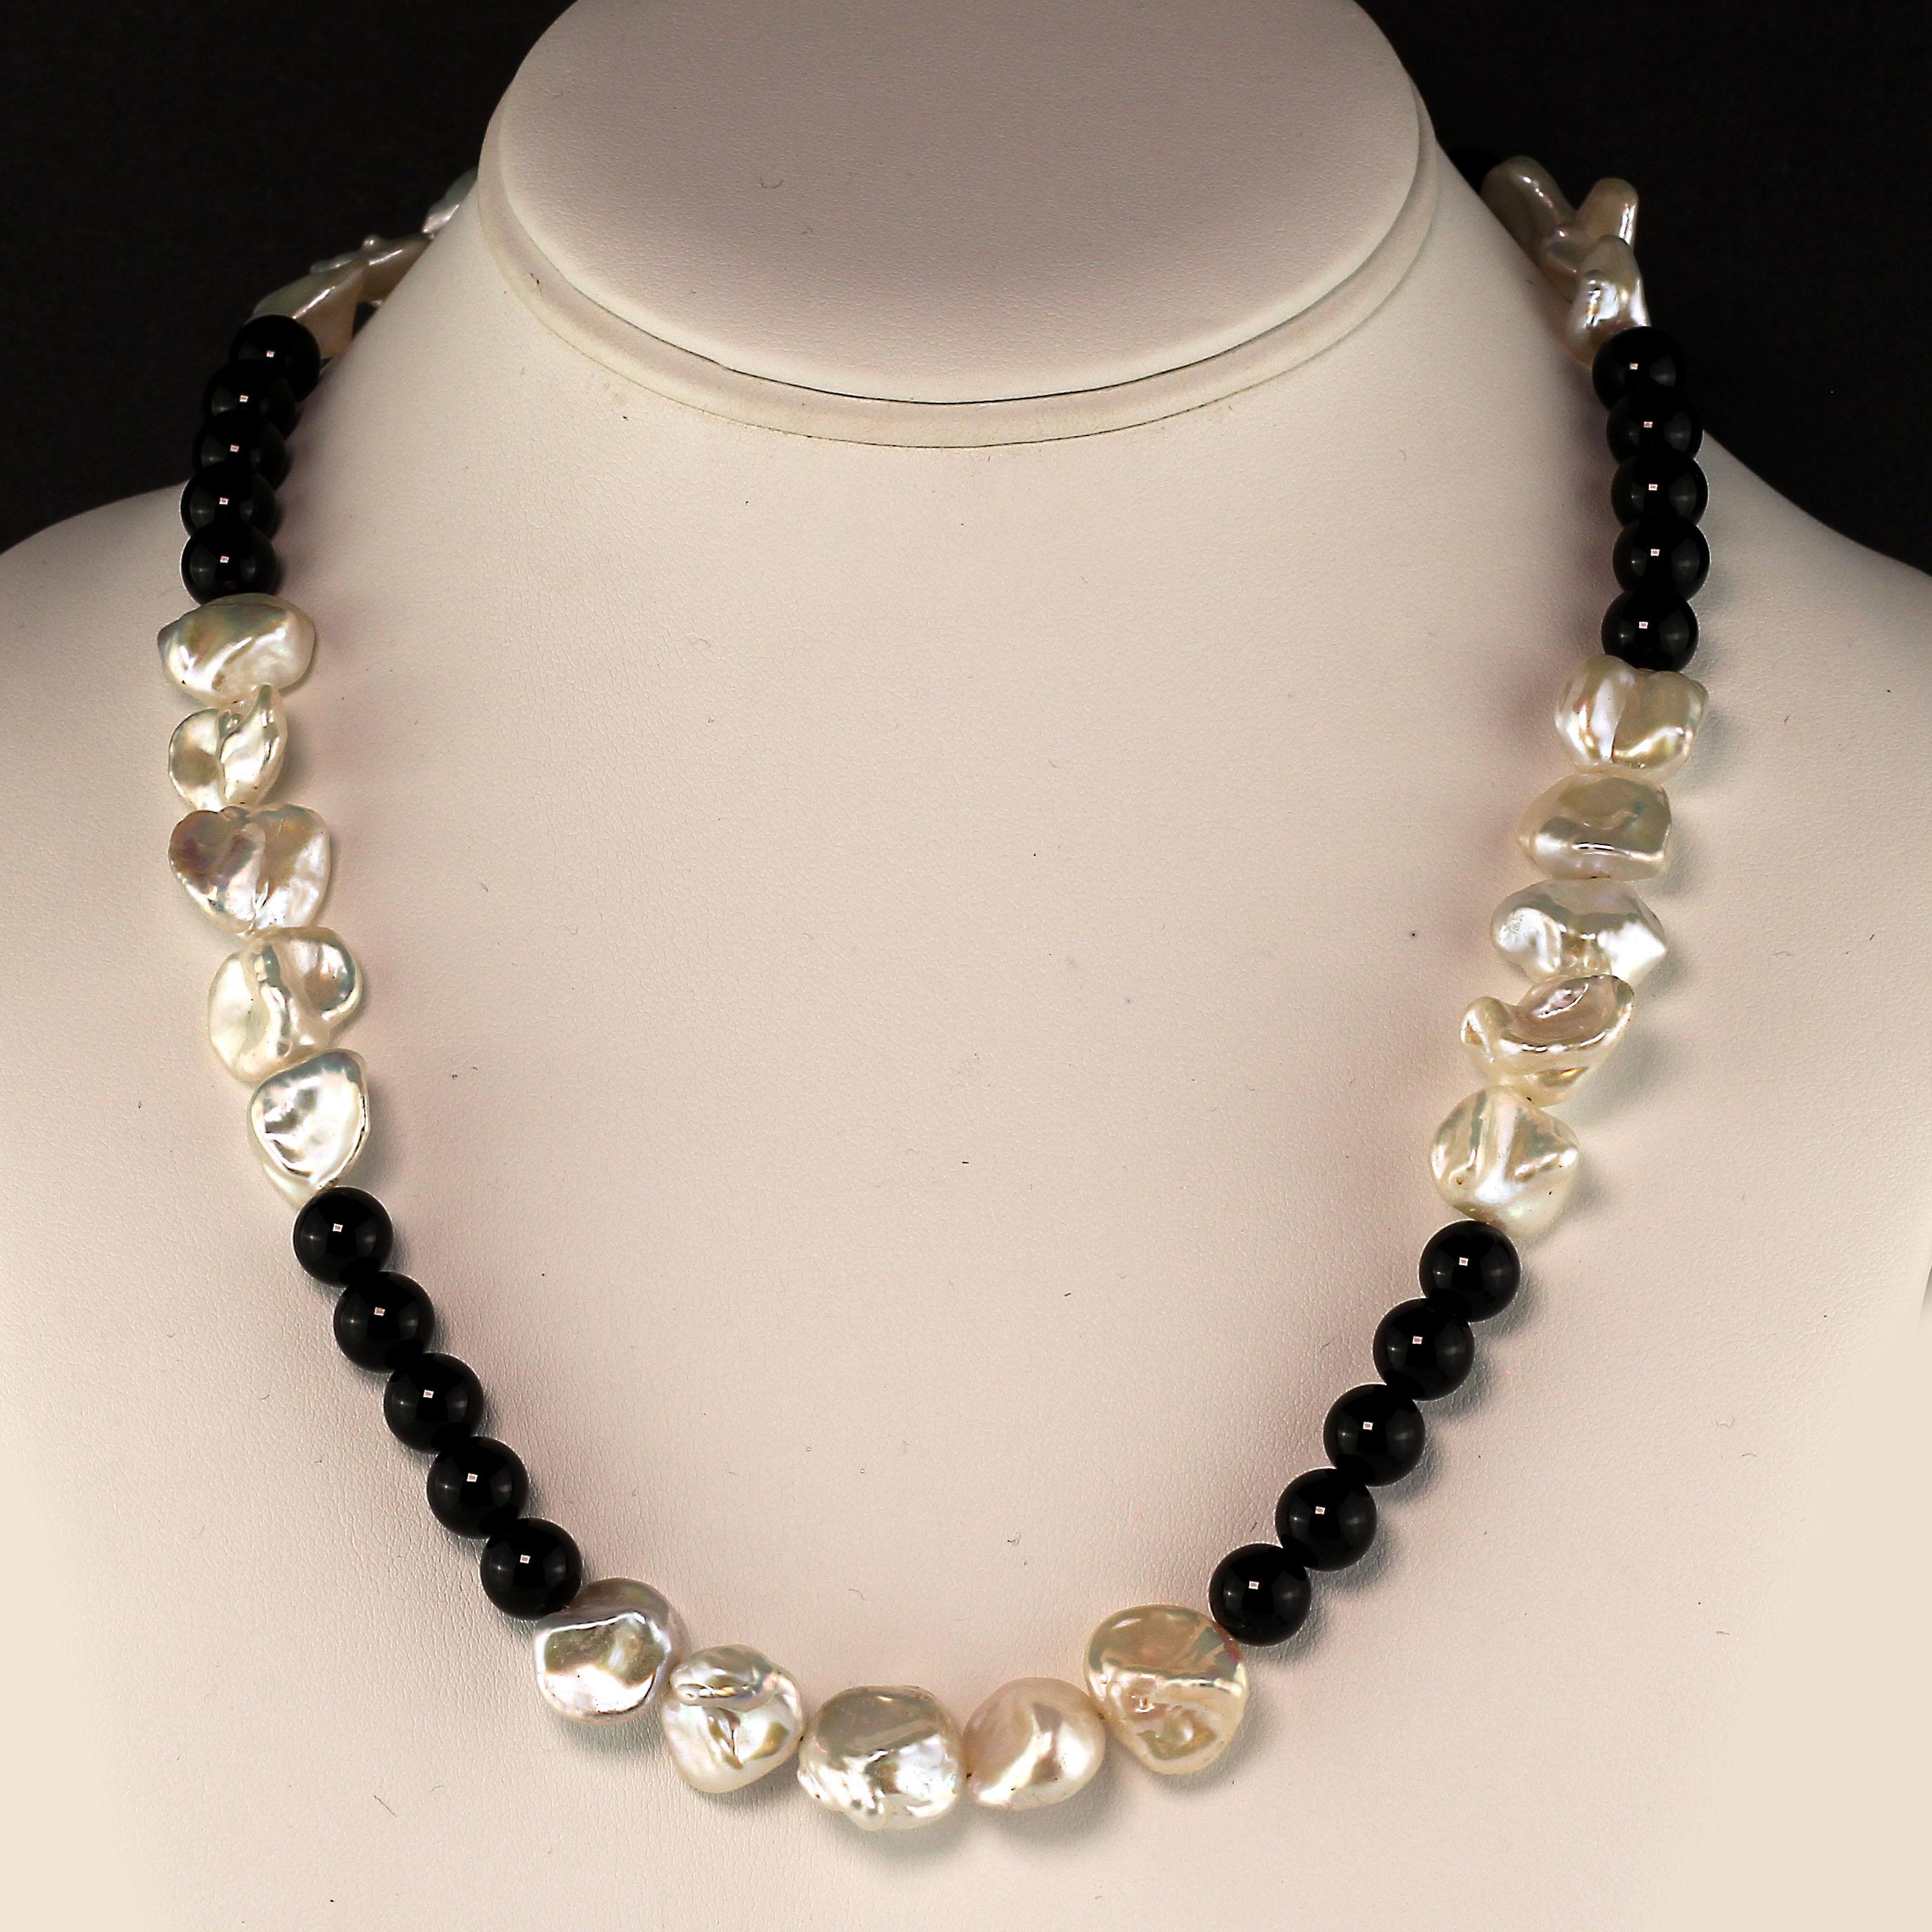 Women's or Men's Gemjunky Elegant Black Onyx and White Pearl Necklace